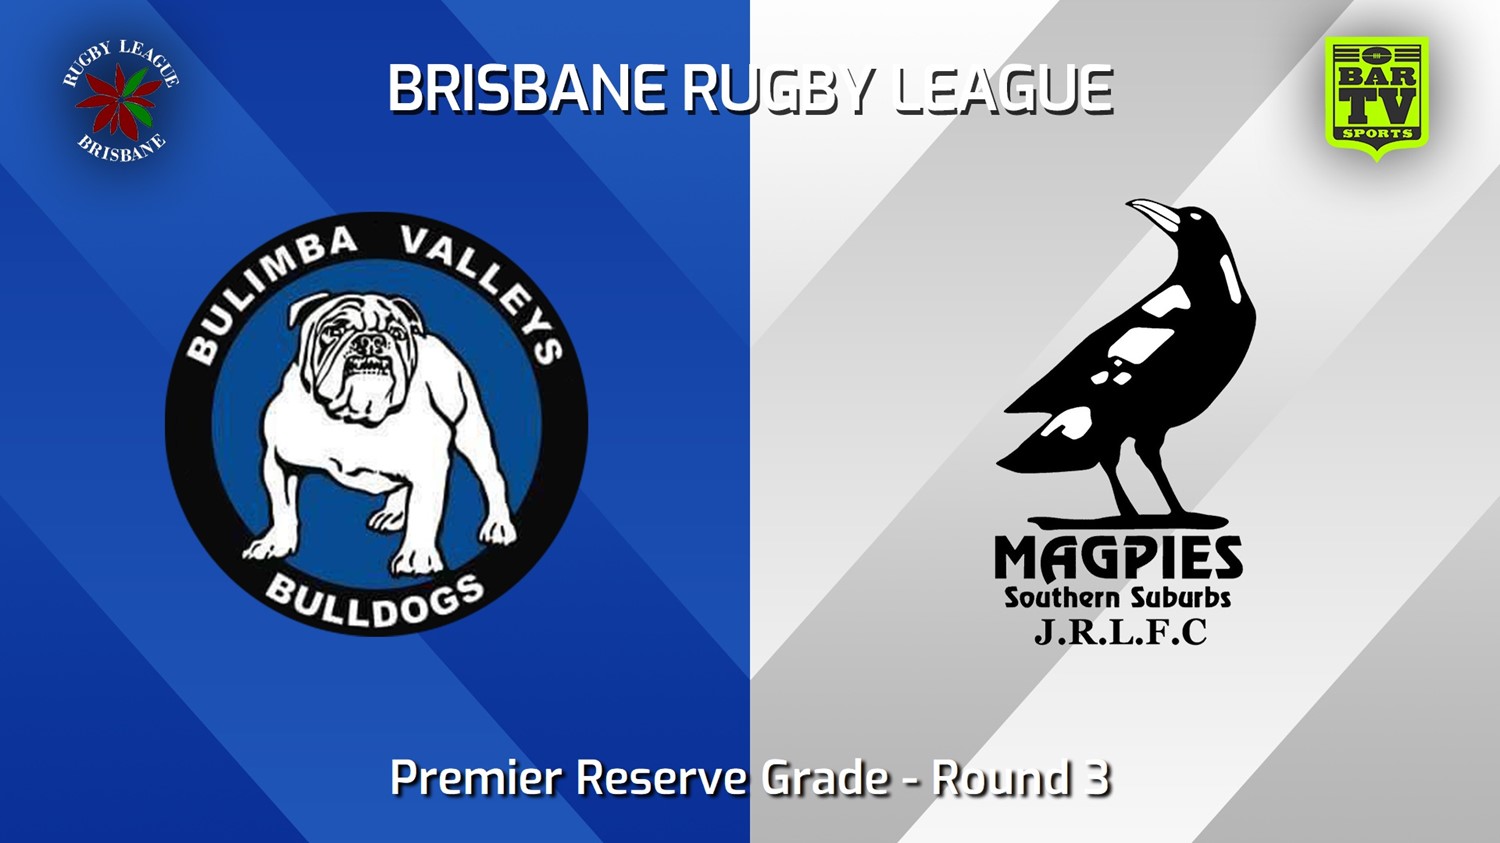 240420-video-BRL Round 3 - Premier Reserve Grade - Bulimba Valleys Bulldogs v Southern Suburbs Magpies Slate Image